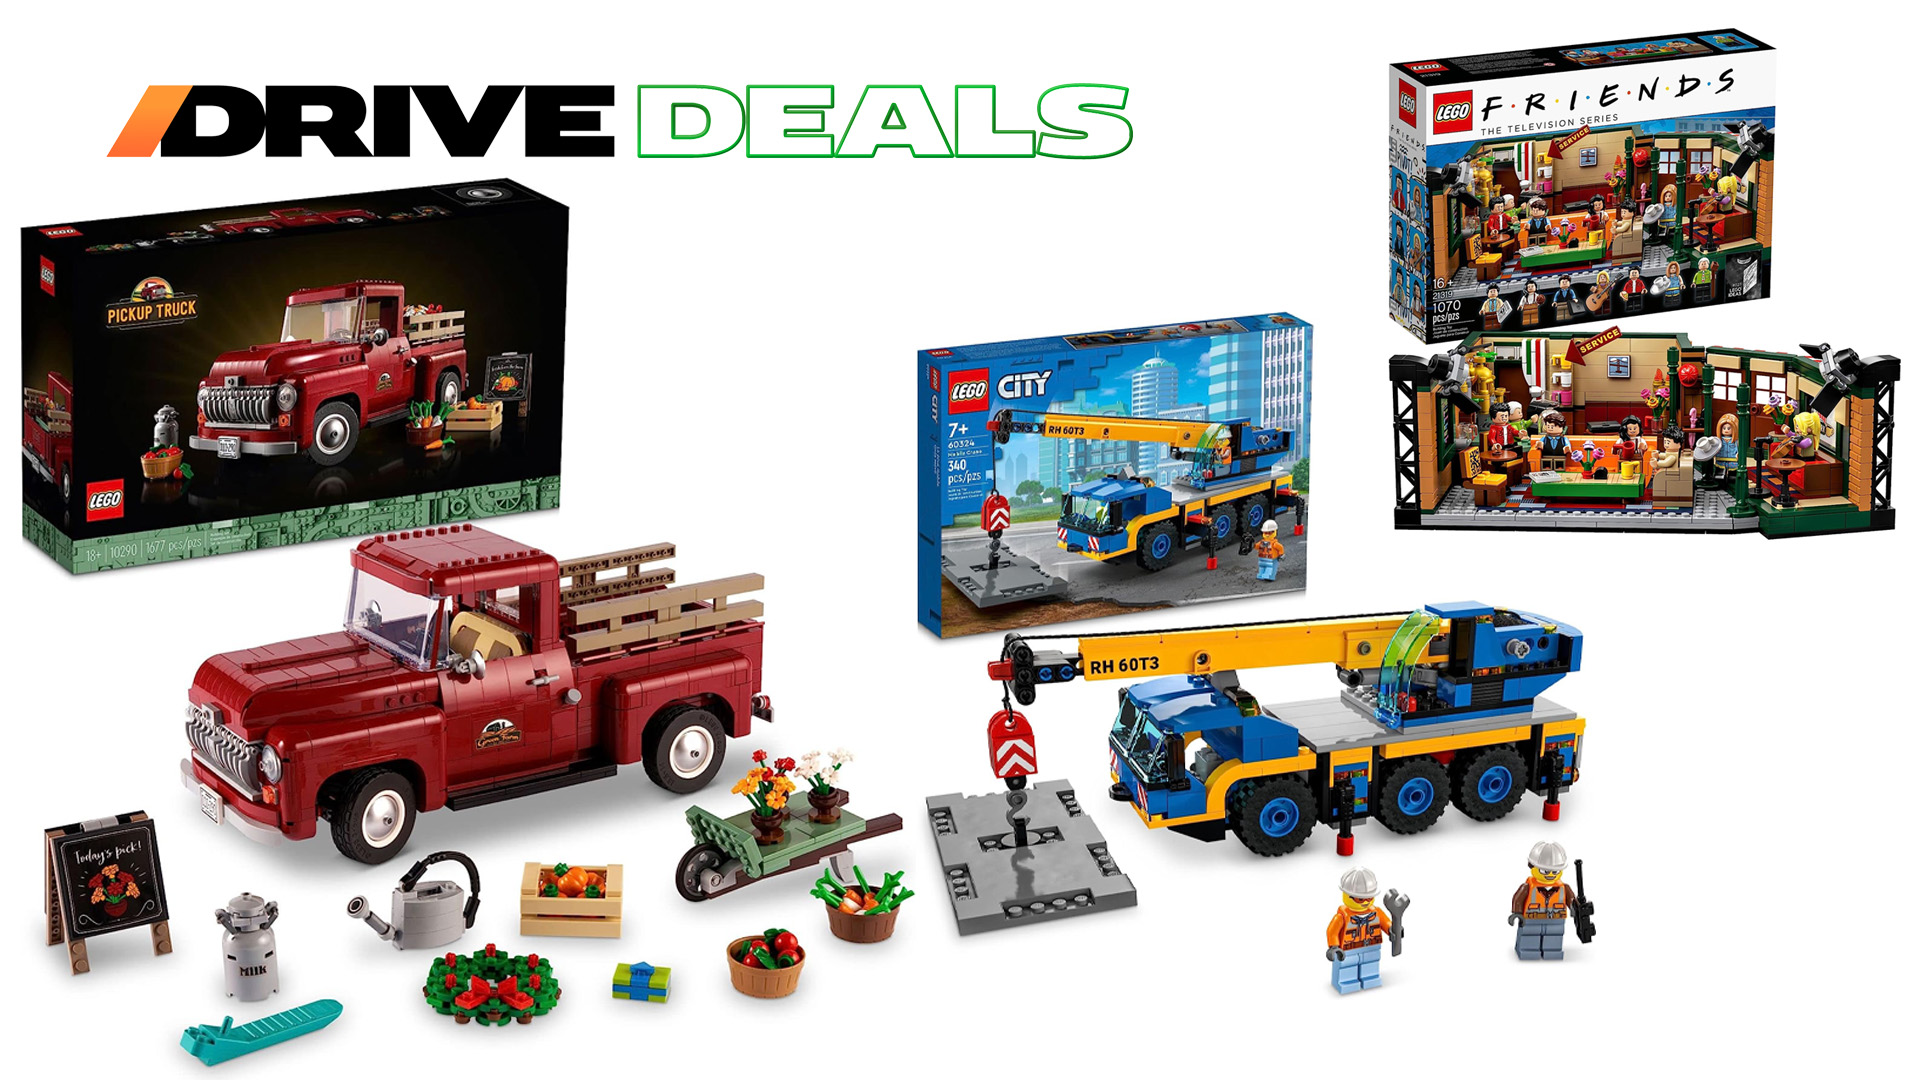 Bricks for Lego Discounts on Amazon Prime Day | The Drive